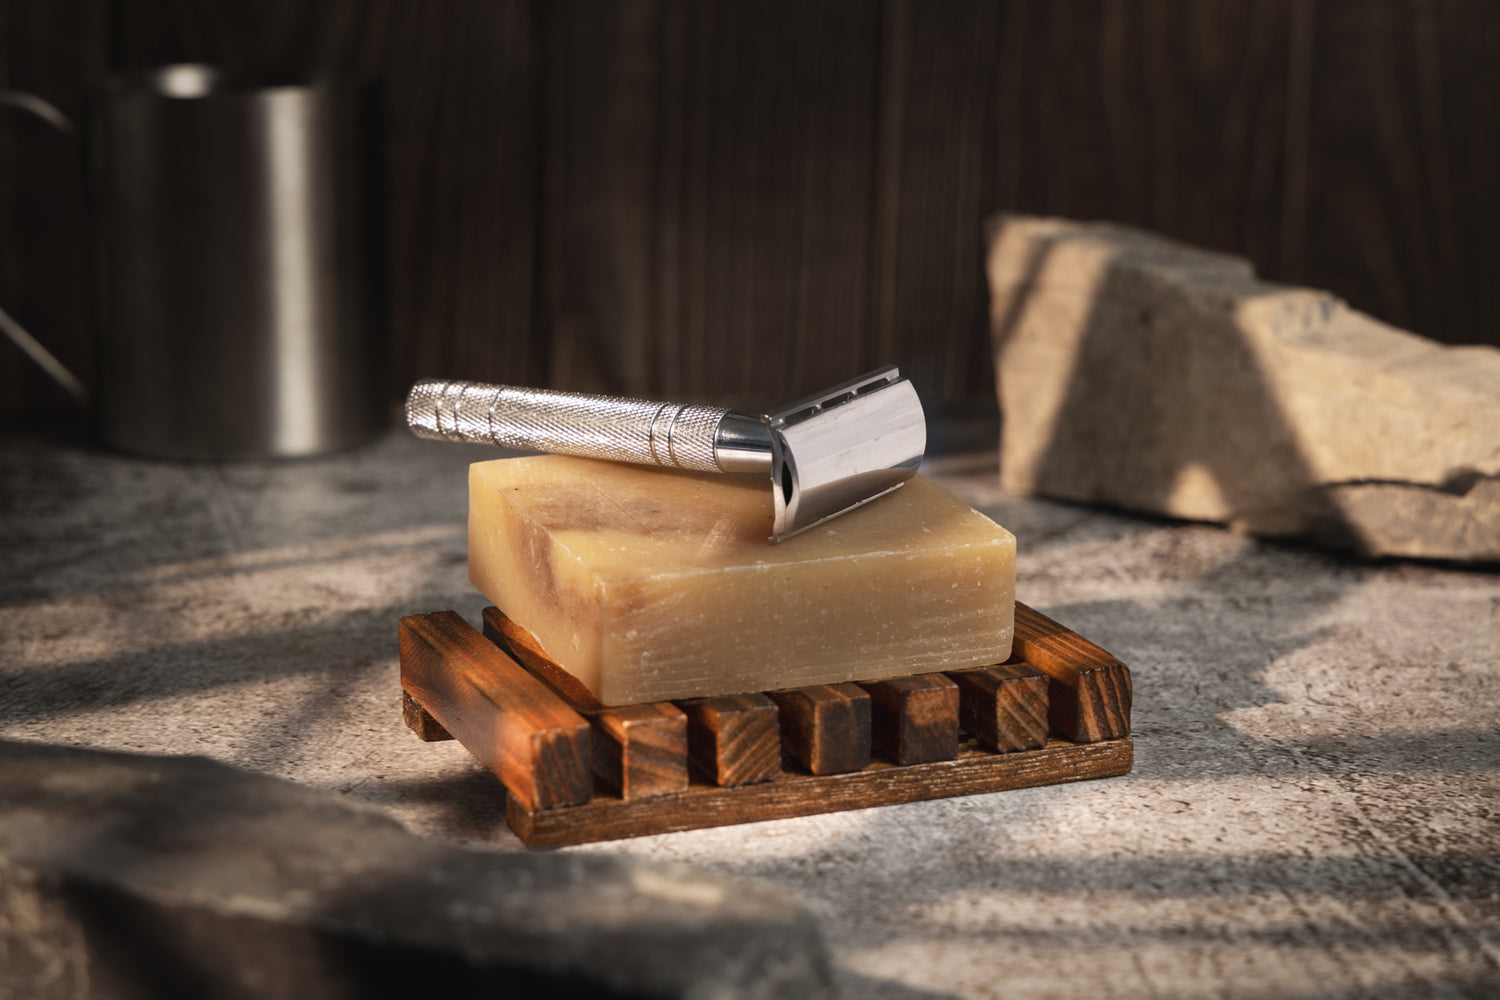 This image shows a reusable metal safety razor on top of a solid shave soap bar which is on top of a wood soap dish. these items are on a stone surface. These are a part of Desesh's range of zero waste, plastic free, eco friendly, more sustainable personal care and everyday essential products.